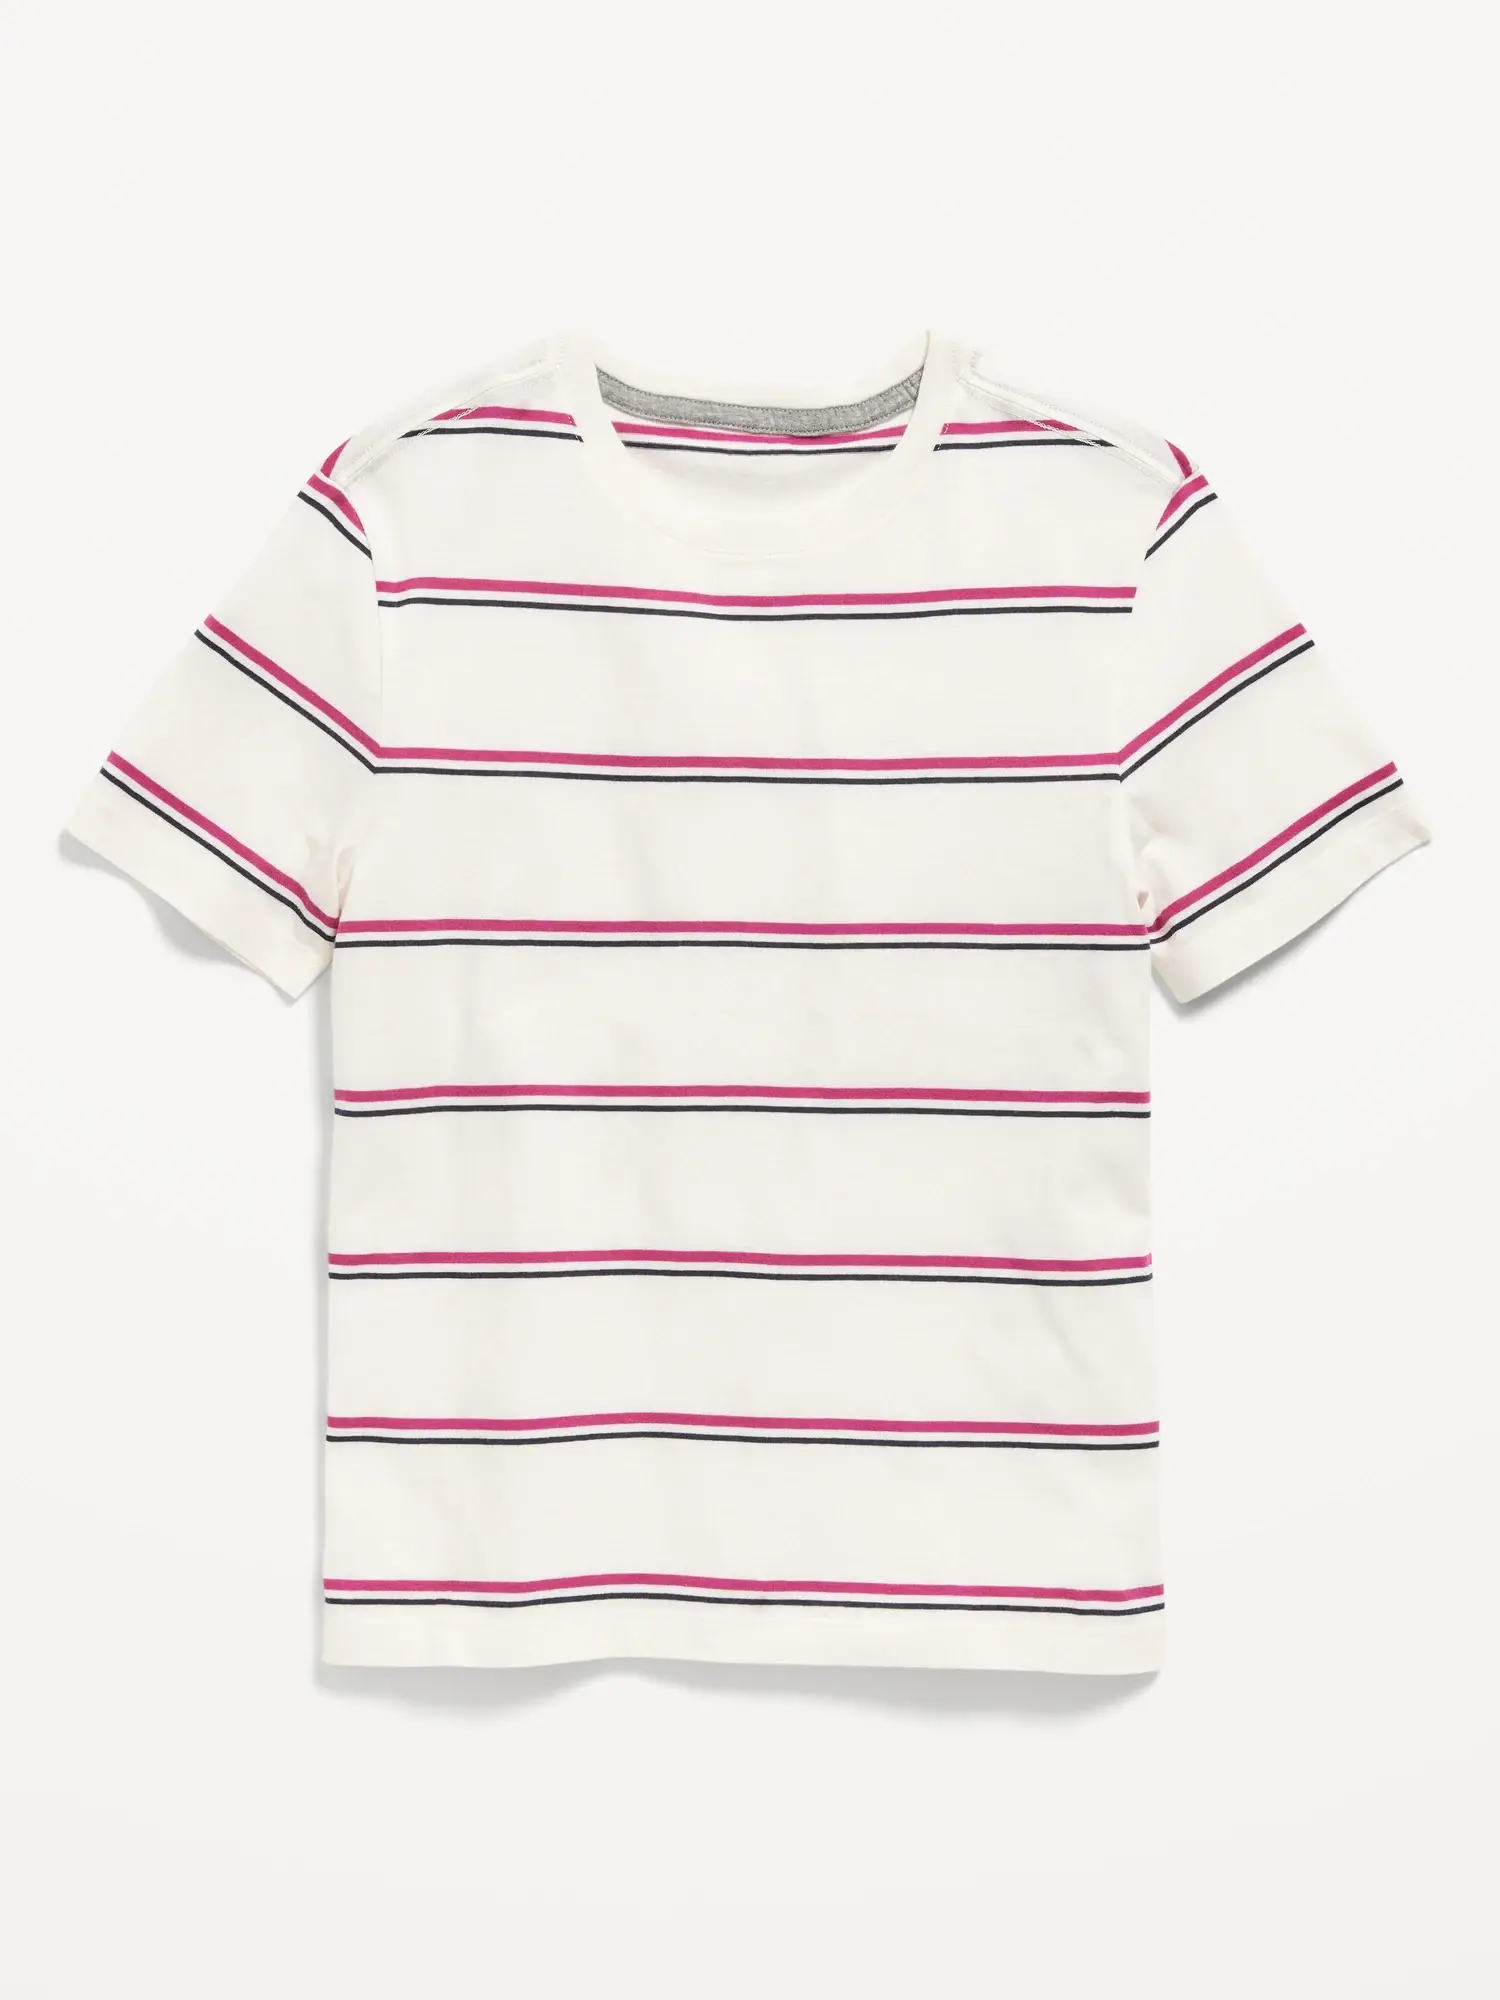 Old Navy Softest Short-Sleeve Striped T-Shirt for Boys pink. 1